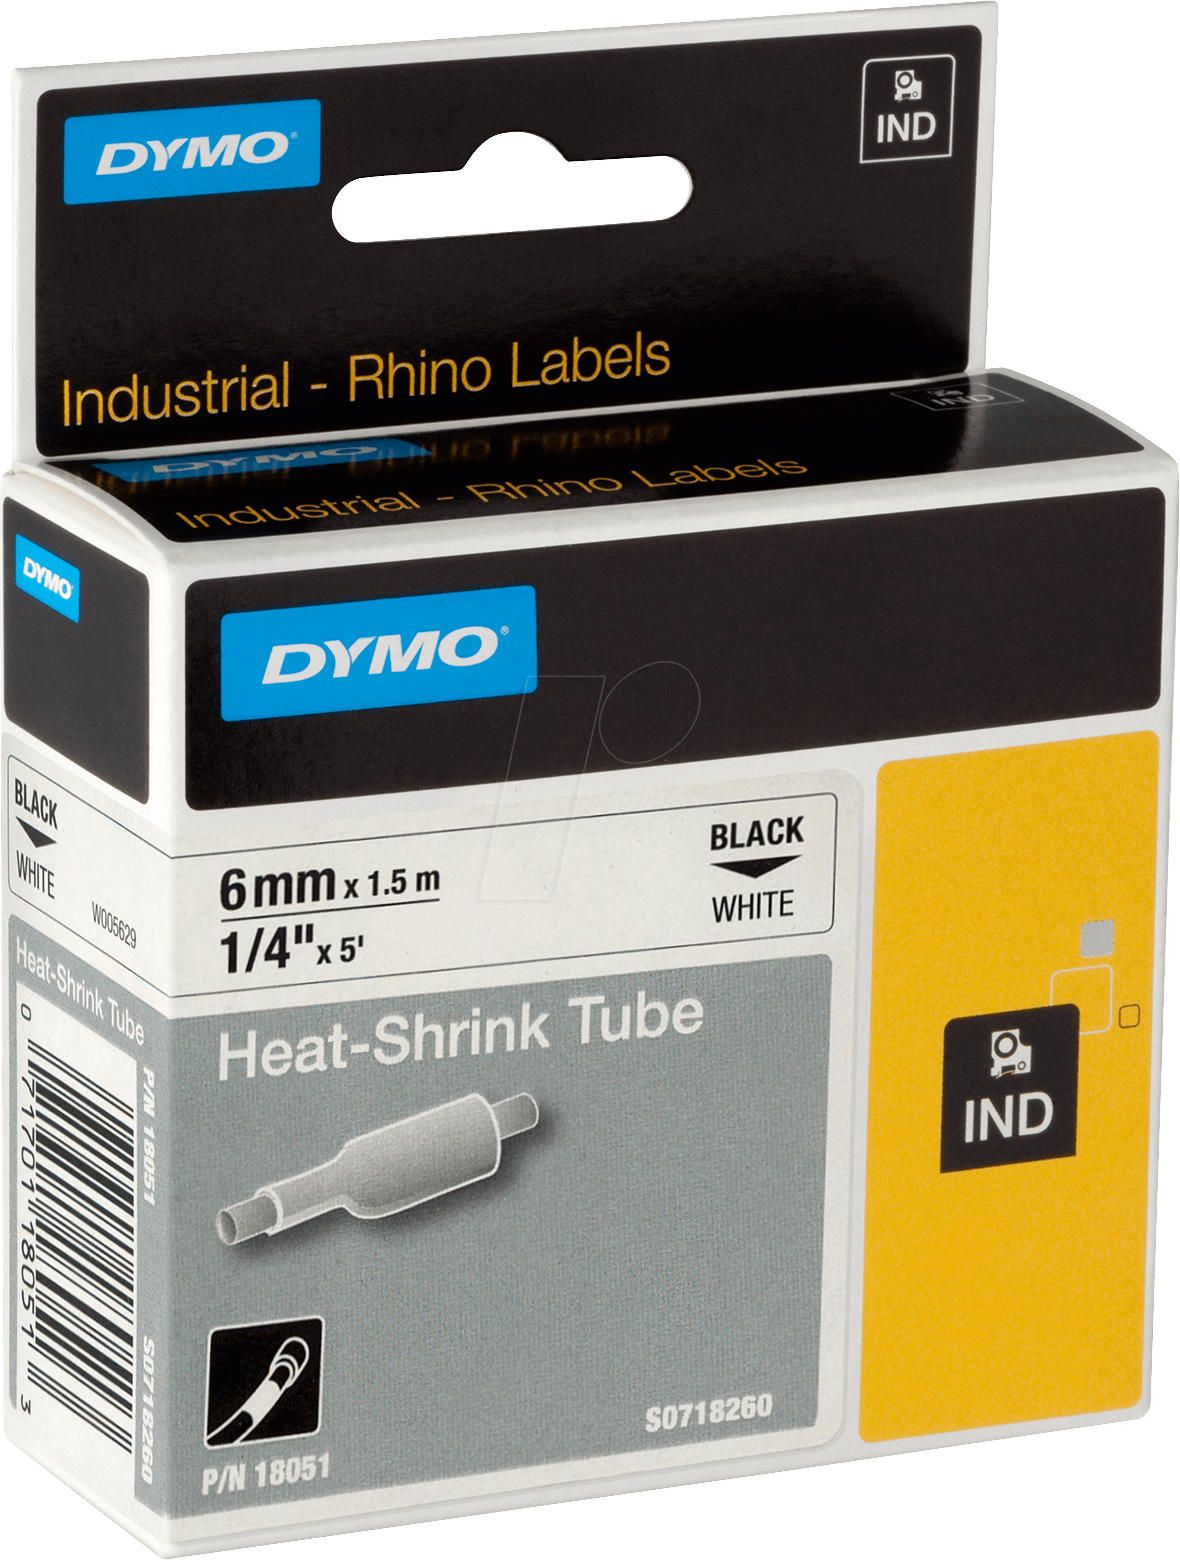 5x for DYMO Rhino 4200 5200 6000 IND Heat-Shrink Tube 18057 Label Tape 19mm 3/4" 